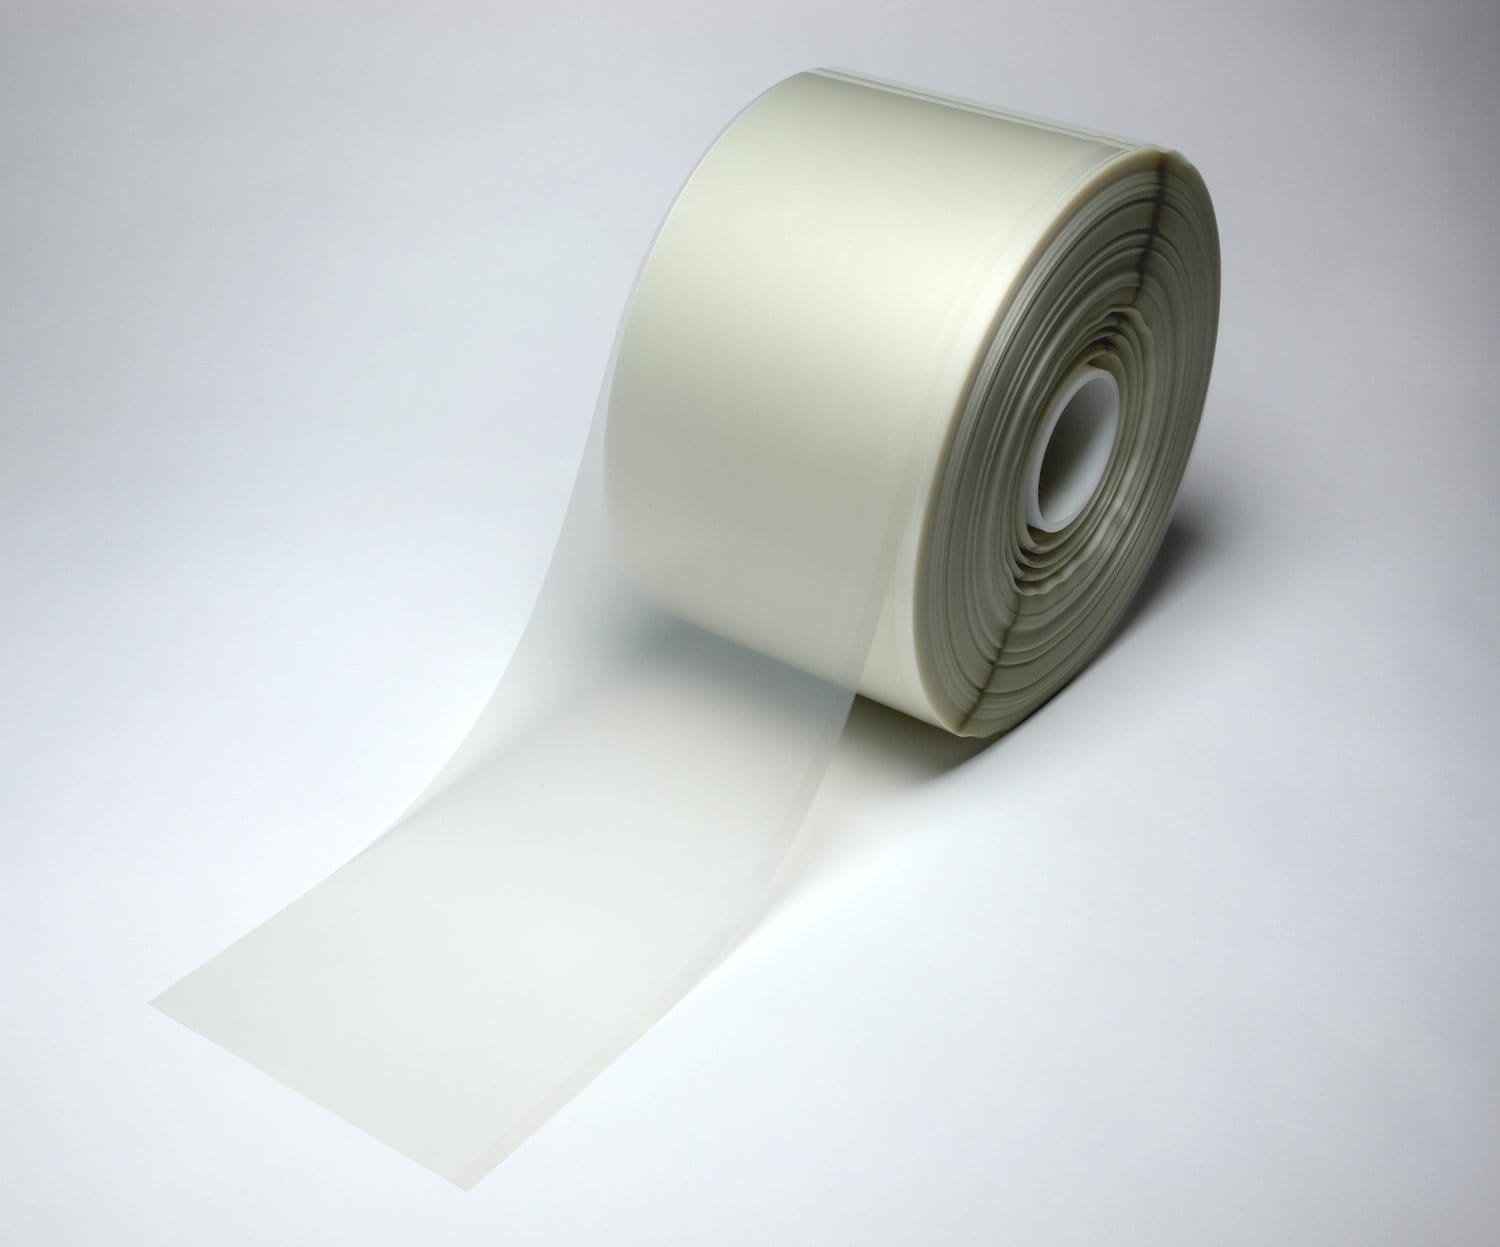 7100012909 - 3M Optically Clear Adhesive 8146-1, configurable products, roll